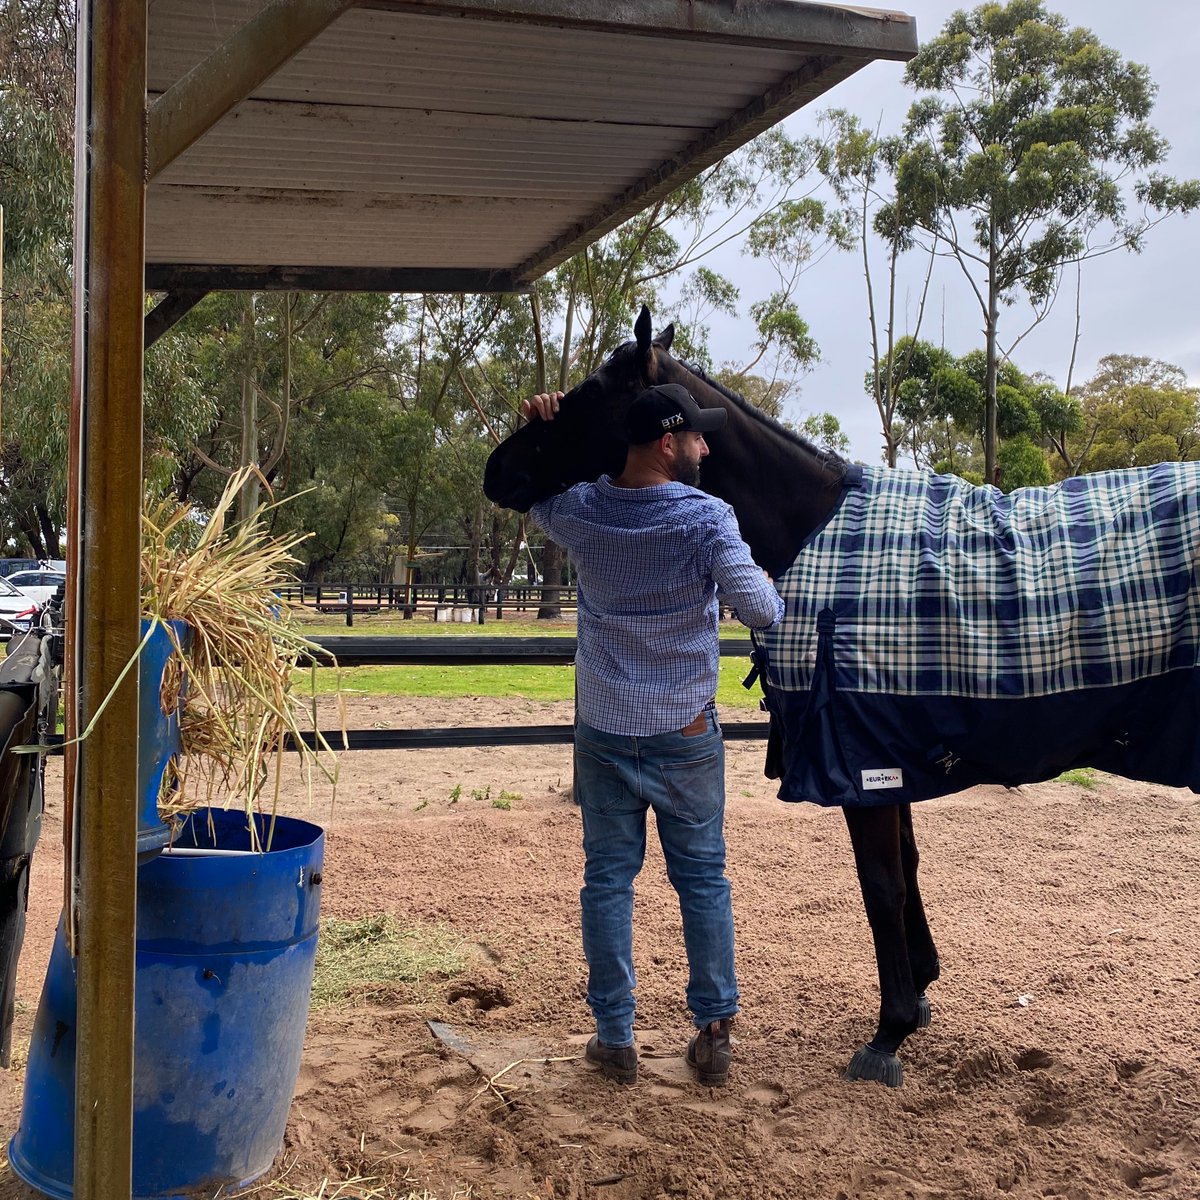 Finishing touches (aka cuddles) for Ironclad complete ahead of the G1 Railway Stakes 🥰 #lovethehorse